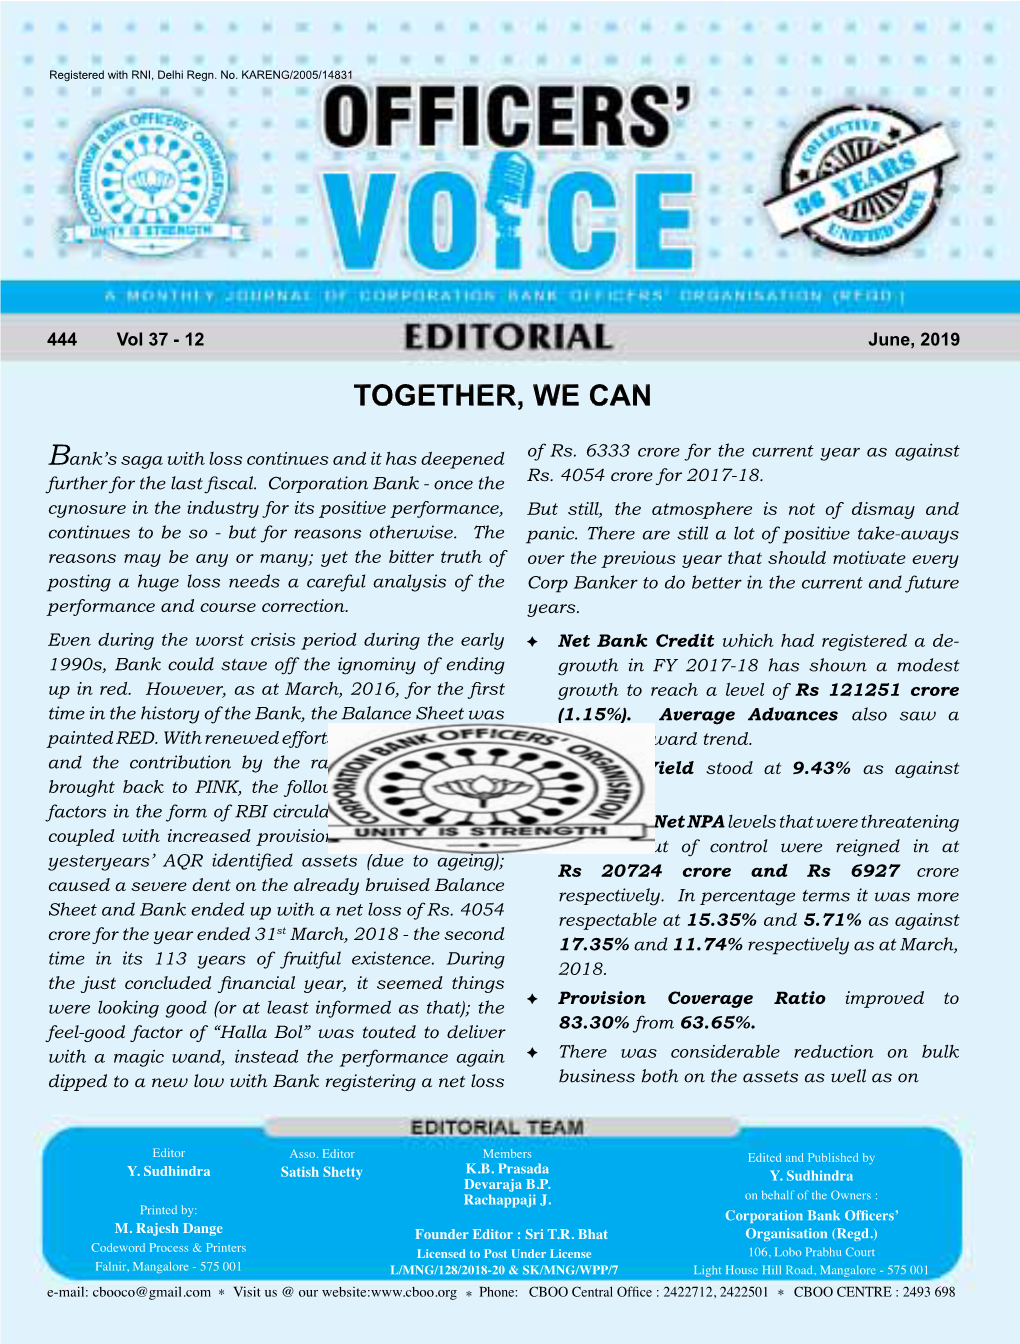 Officers' Voice, June 2019